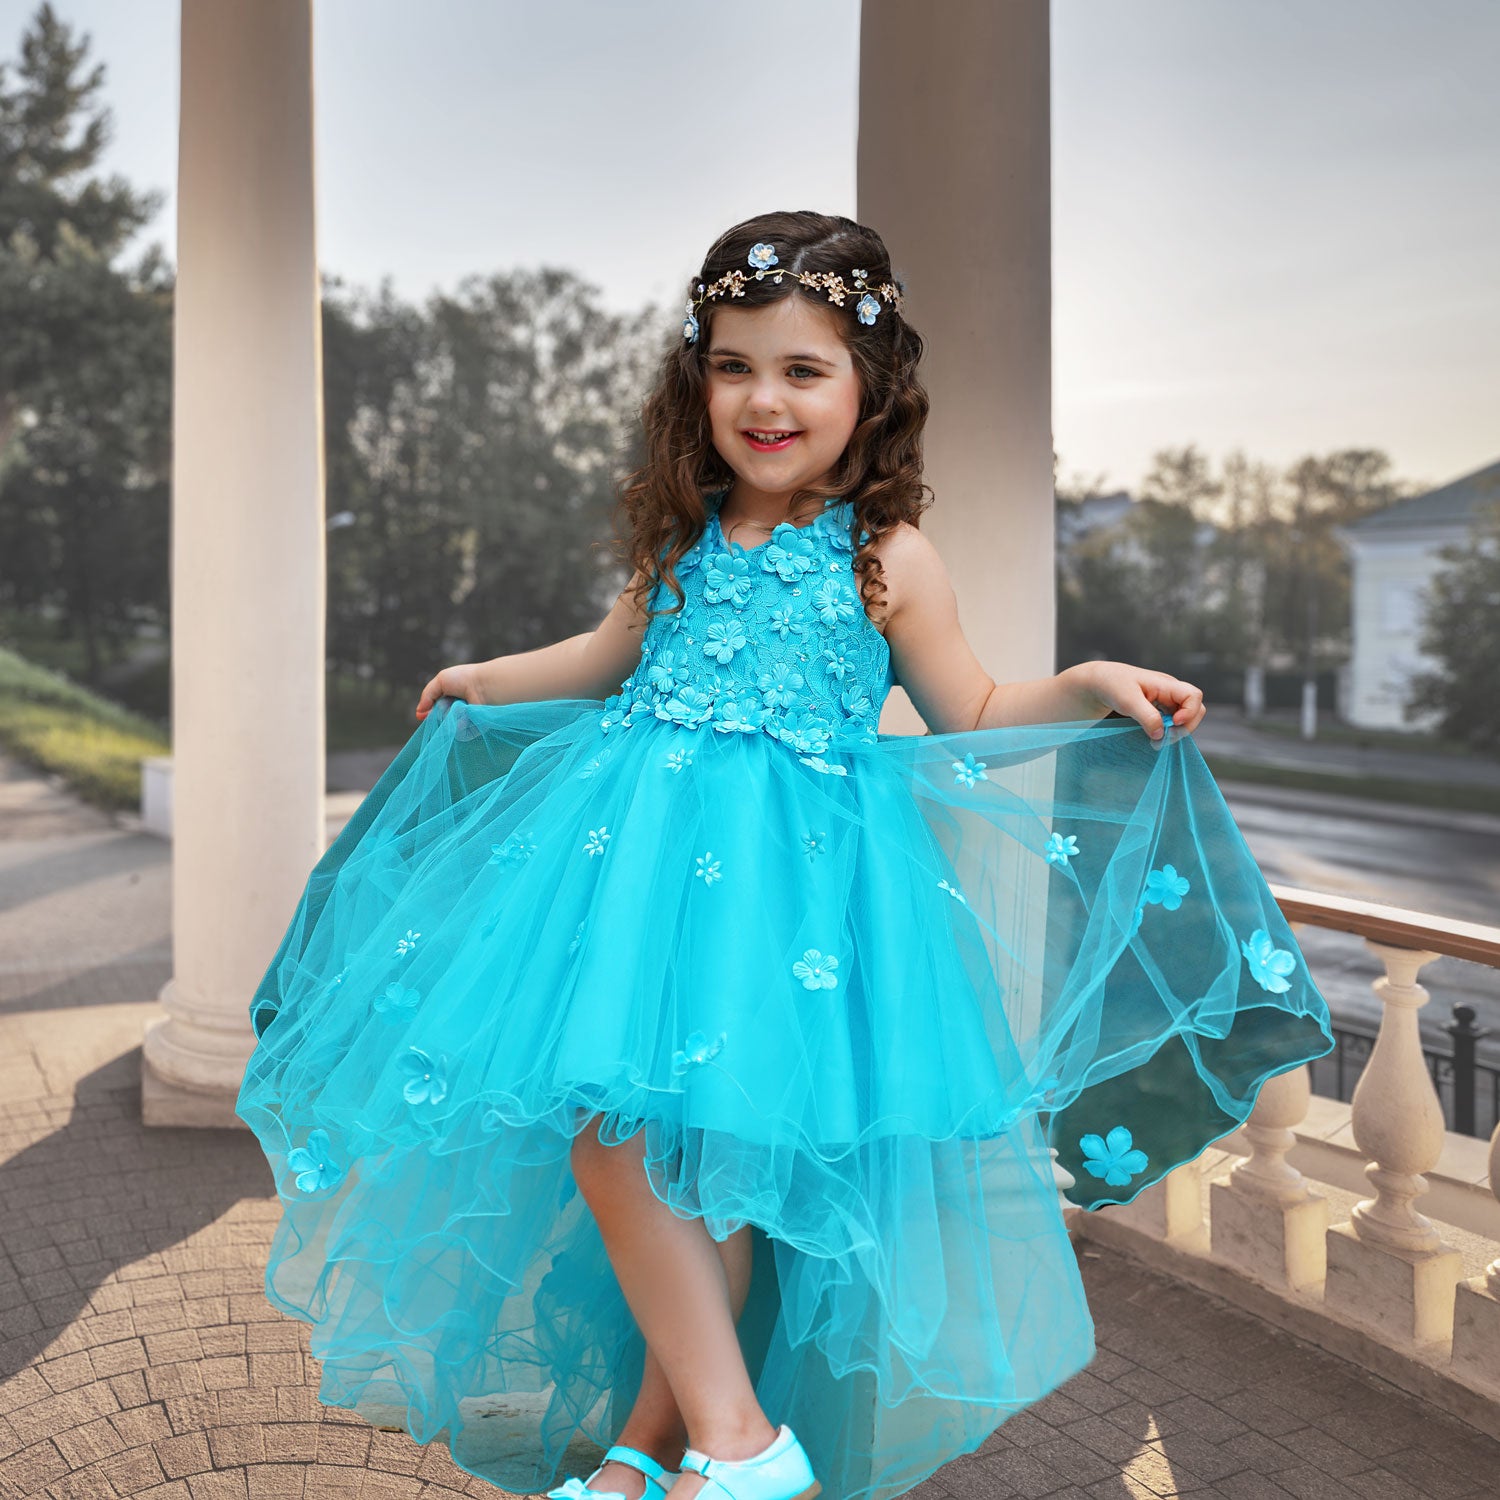 Gowns for Girls - Buy Girls Gowns Online in USA